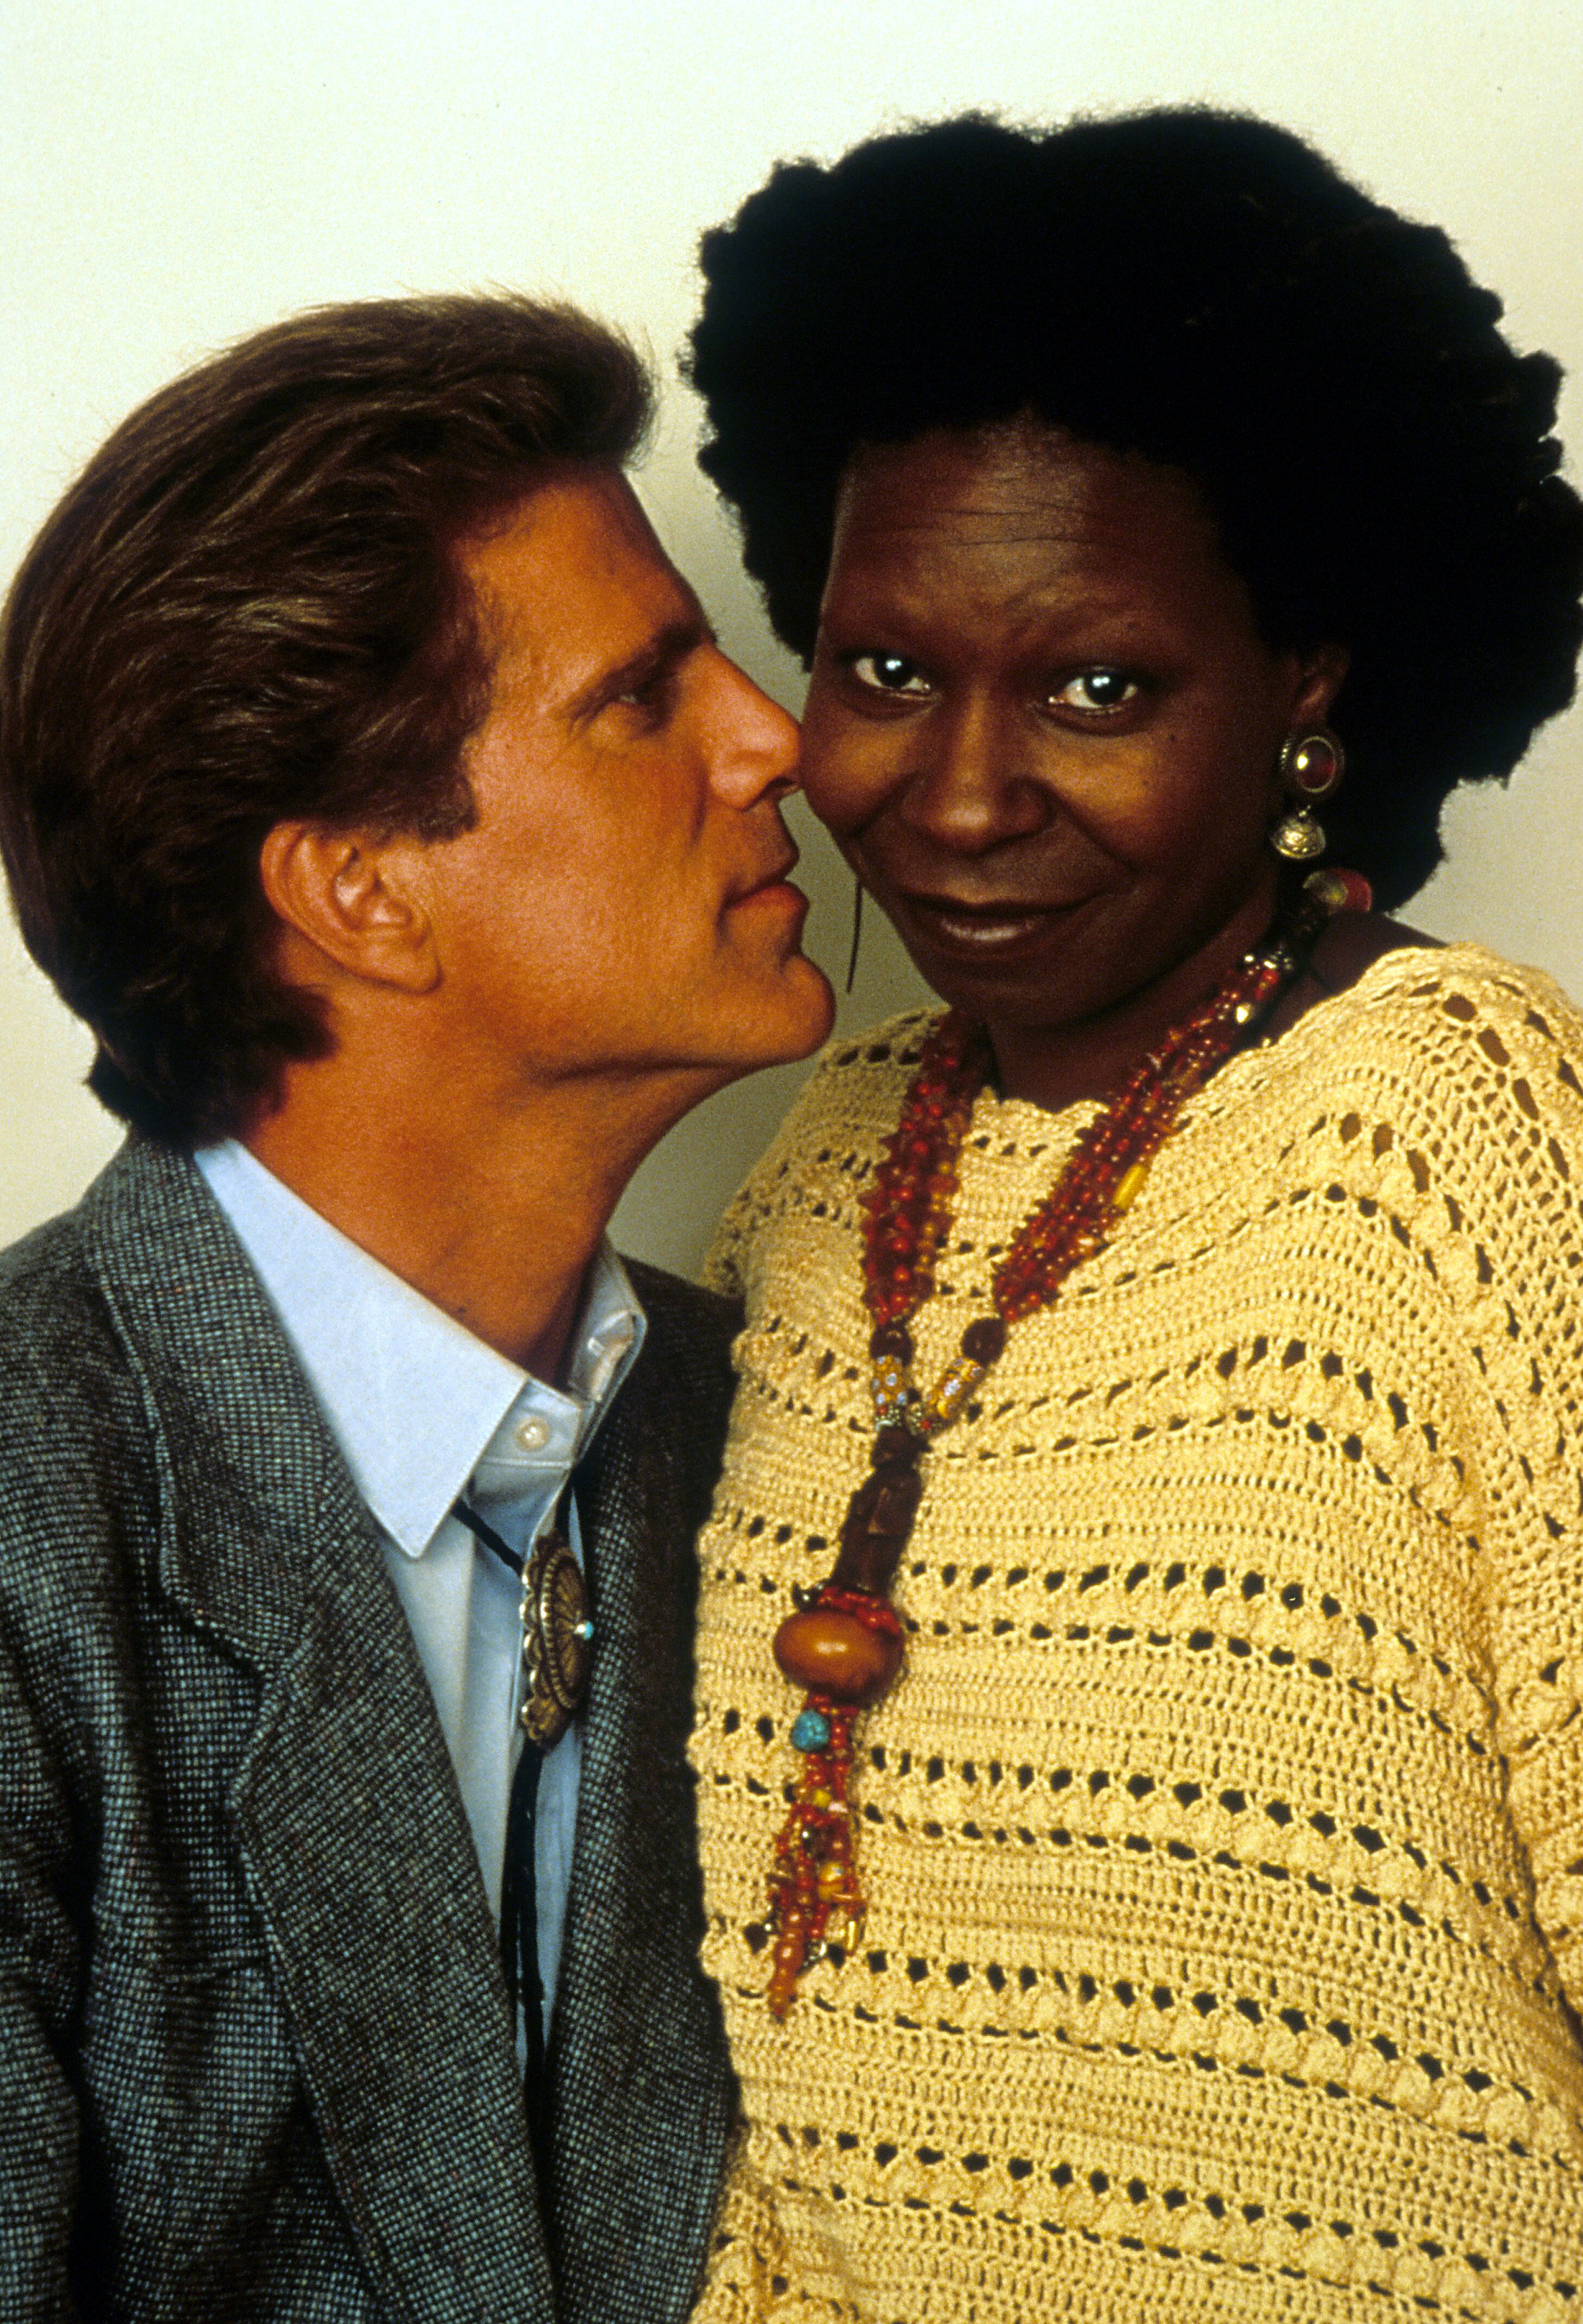 Actress Whoopi Goldberg posing next to Ted Danson in a scene from the film "Made In America"  in 1993 | Photo: Getty Images